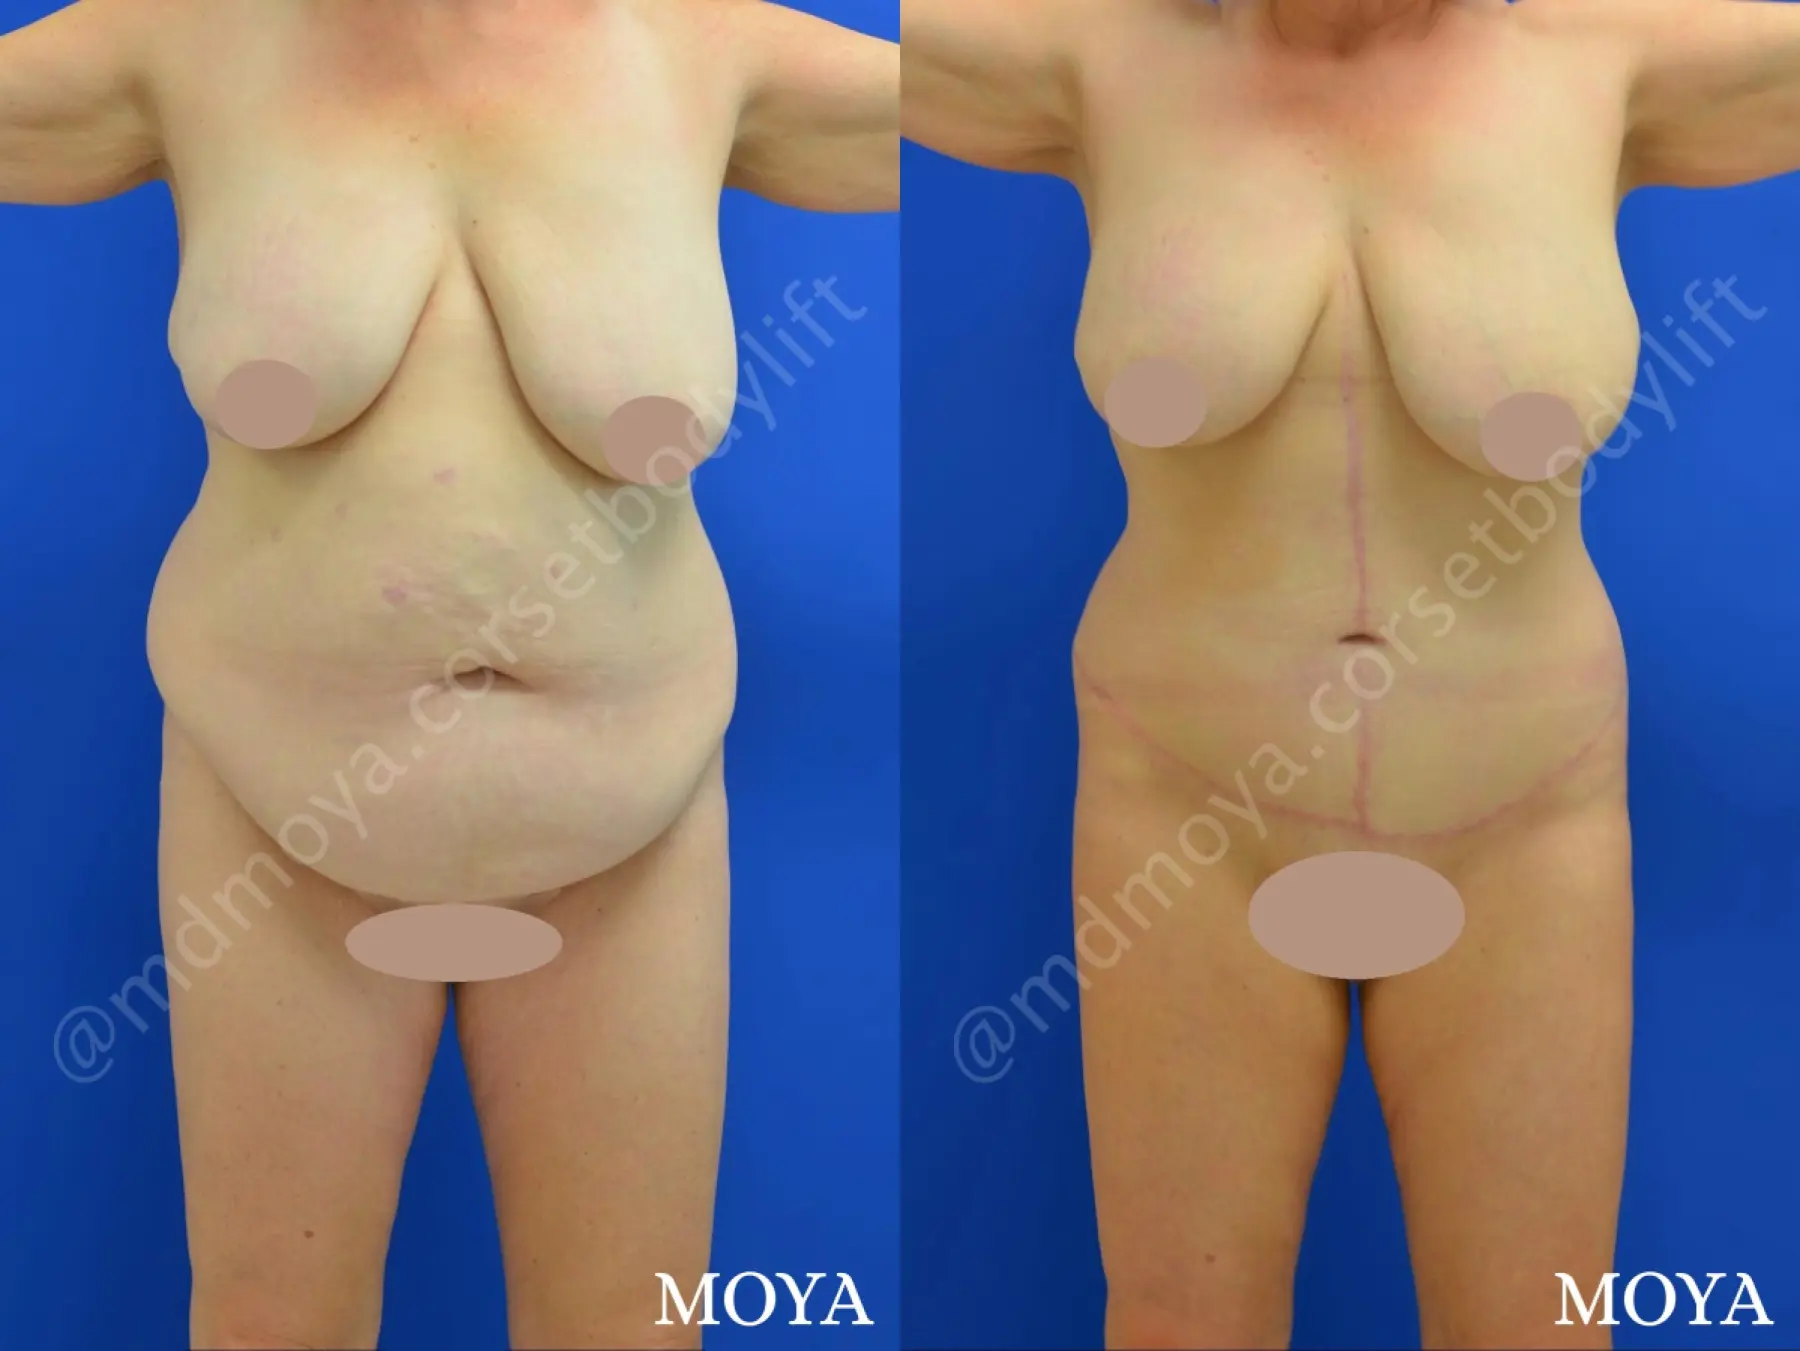 Fleur-de-lis Tummy Tuck (std):  BMI 28 - Before and After 1